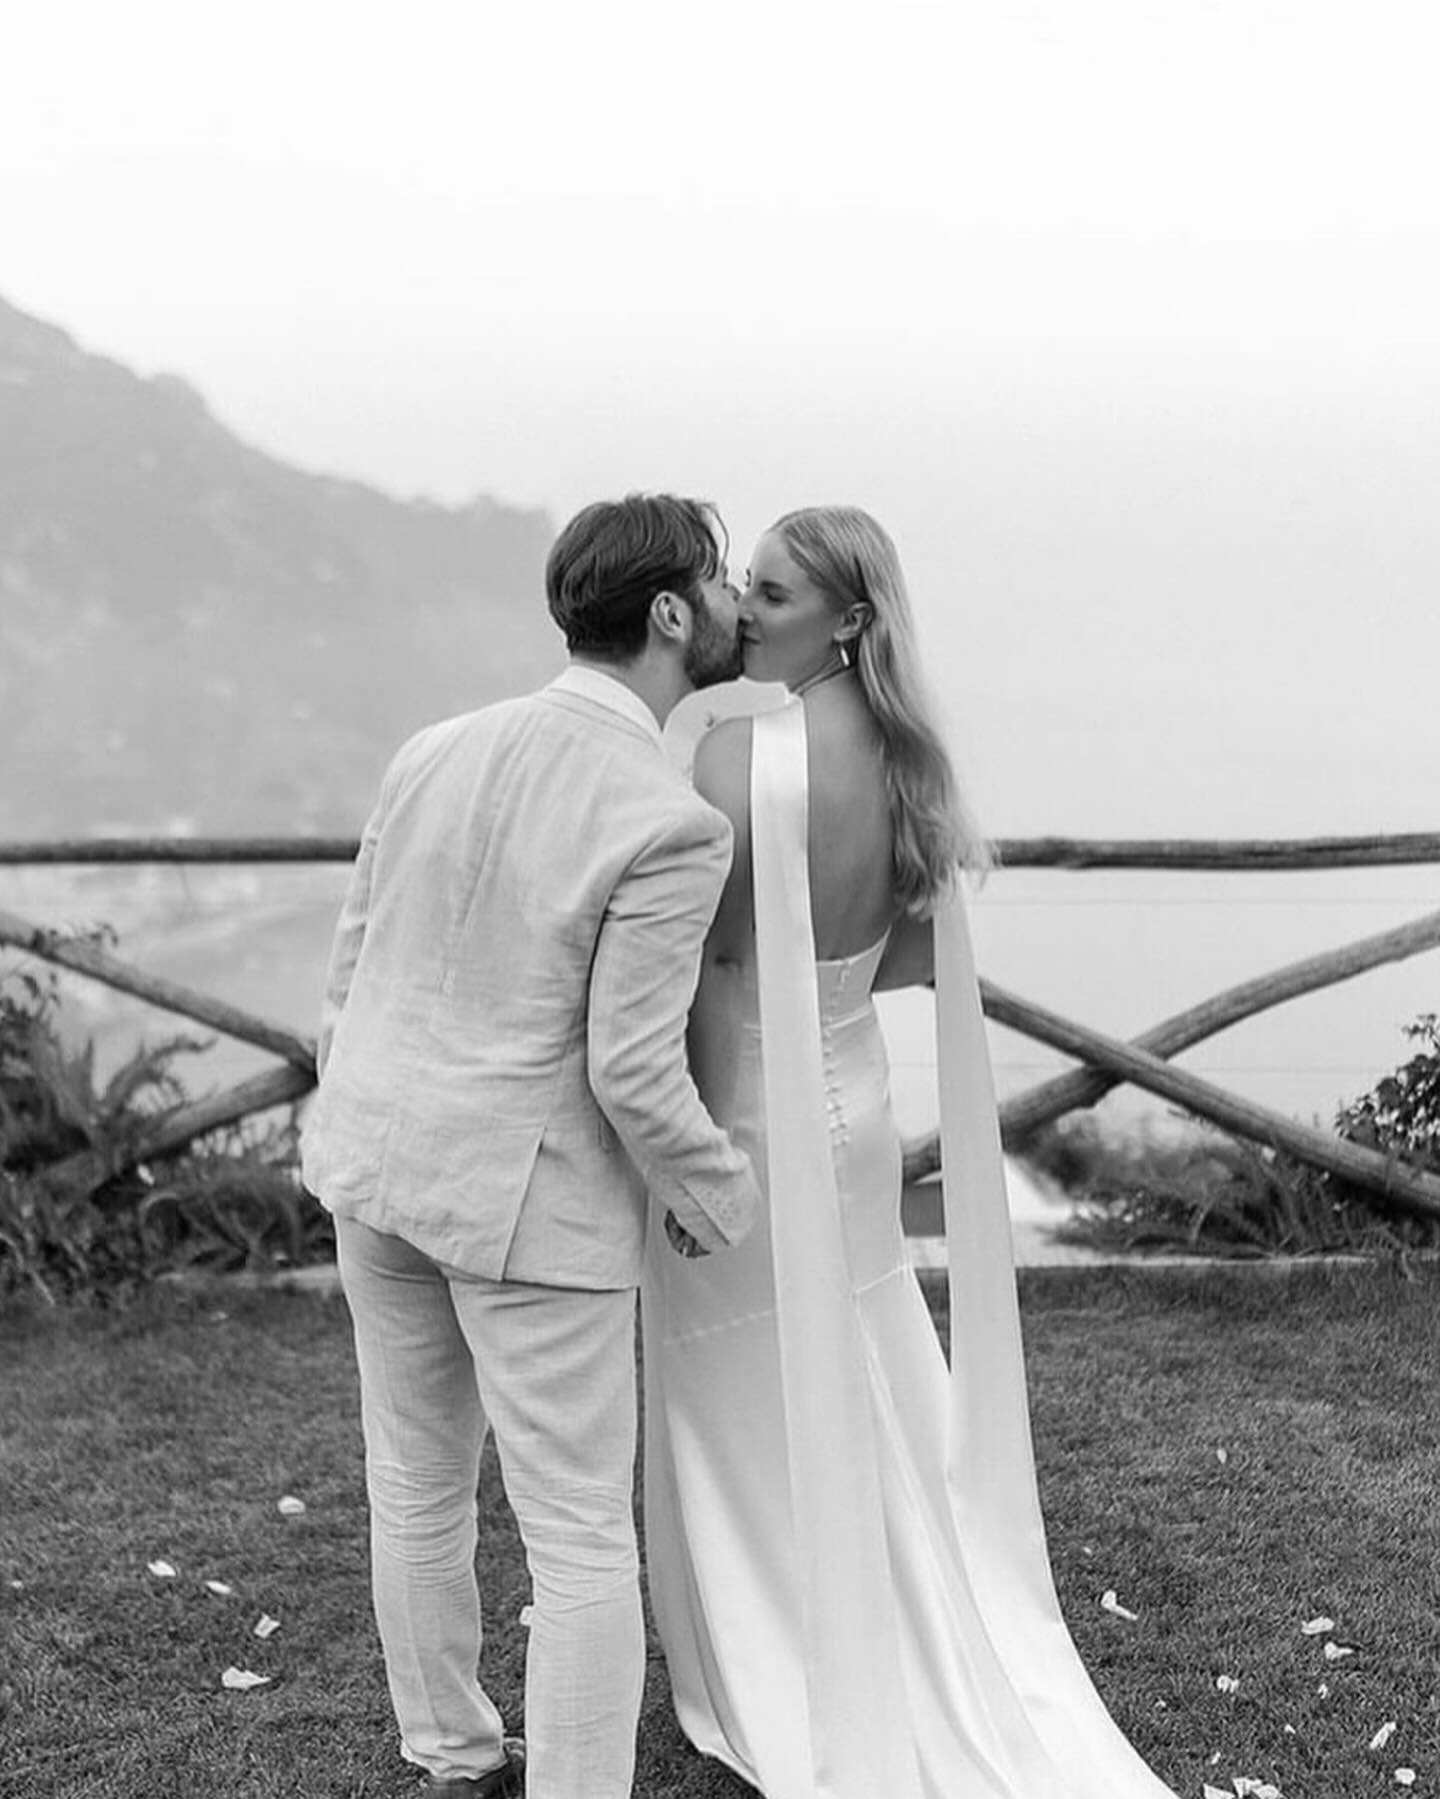 Romanticizing this day, forever 🕊️ #AGbride Hope wears our beloved #agSloan Gown paired with our Silk Scarf
⠀⠀⠀⠀⠀⠀⠀⠀⠀
photo: @paolomanzi 
video: @_harveyfilms
stockist: @amare_bride
planner: @youritalianweddingplanner
florals: @ravelloweddingflowers